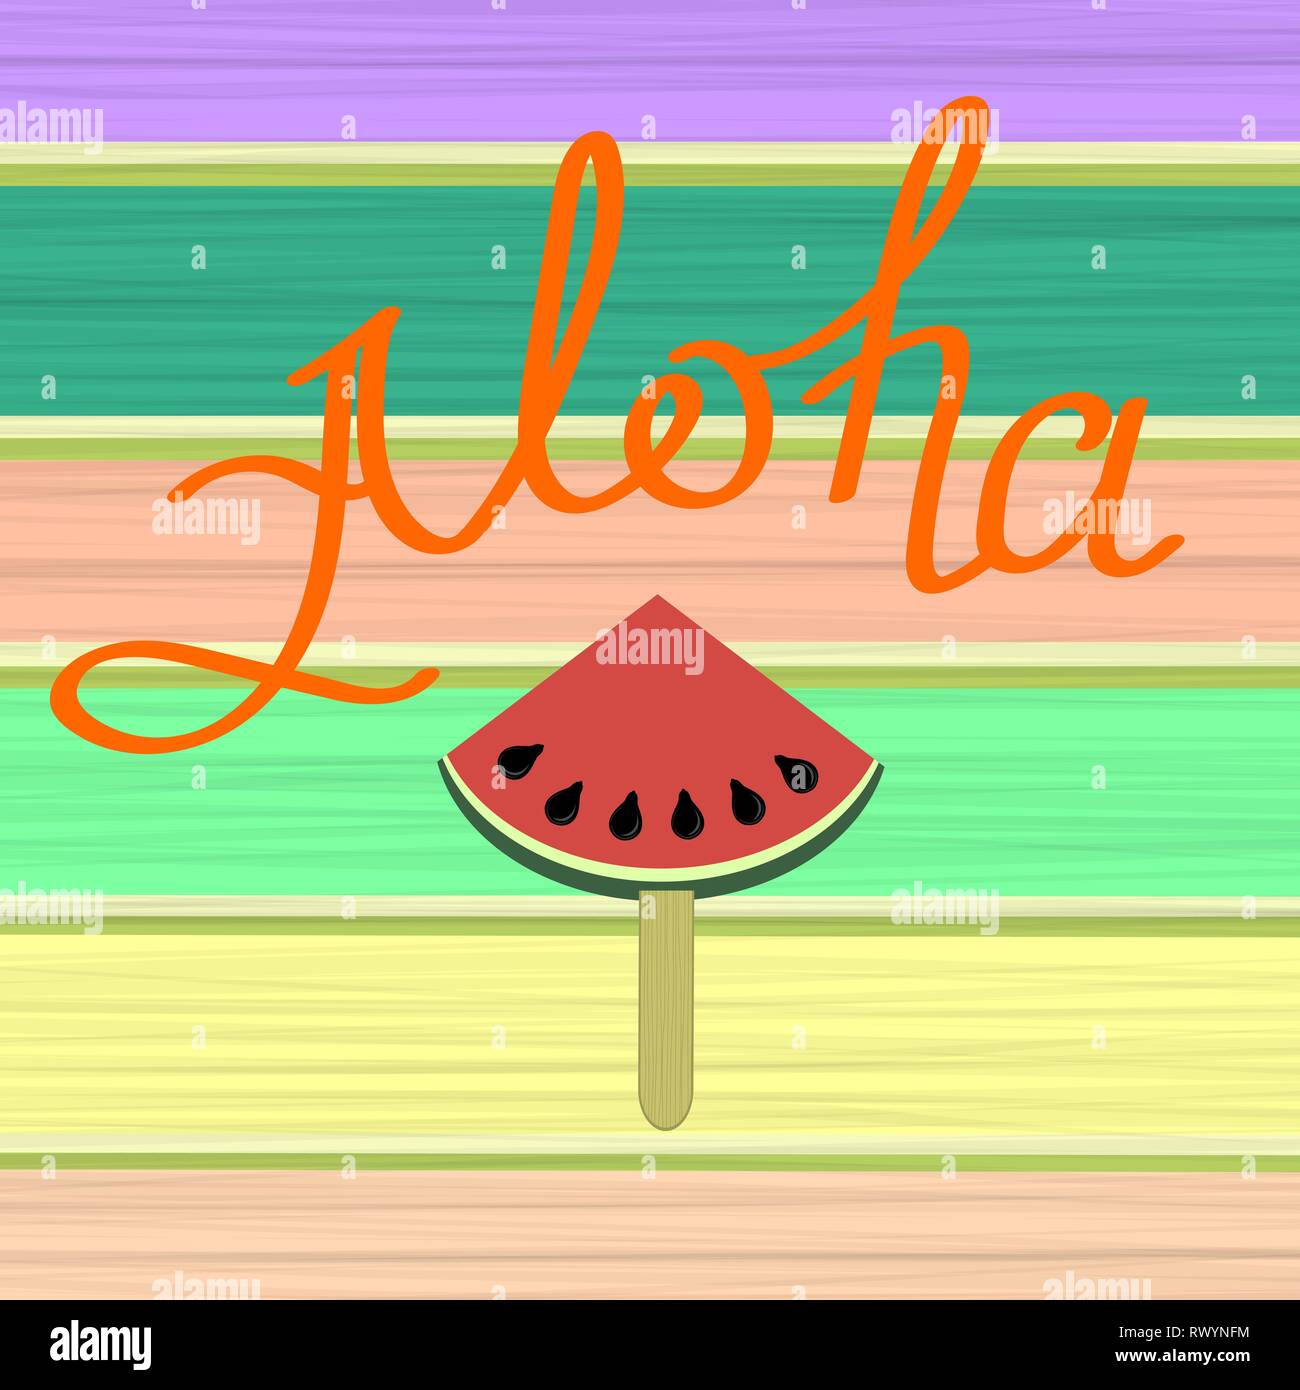 Lettering Vacation Text with Part of Watermelon on Colorful Wooden Planks. Hand Sketched Aloha Typography Sign Stock Vector